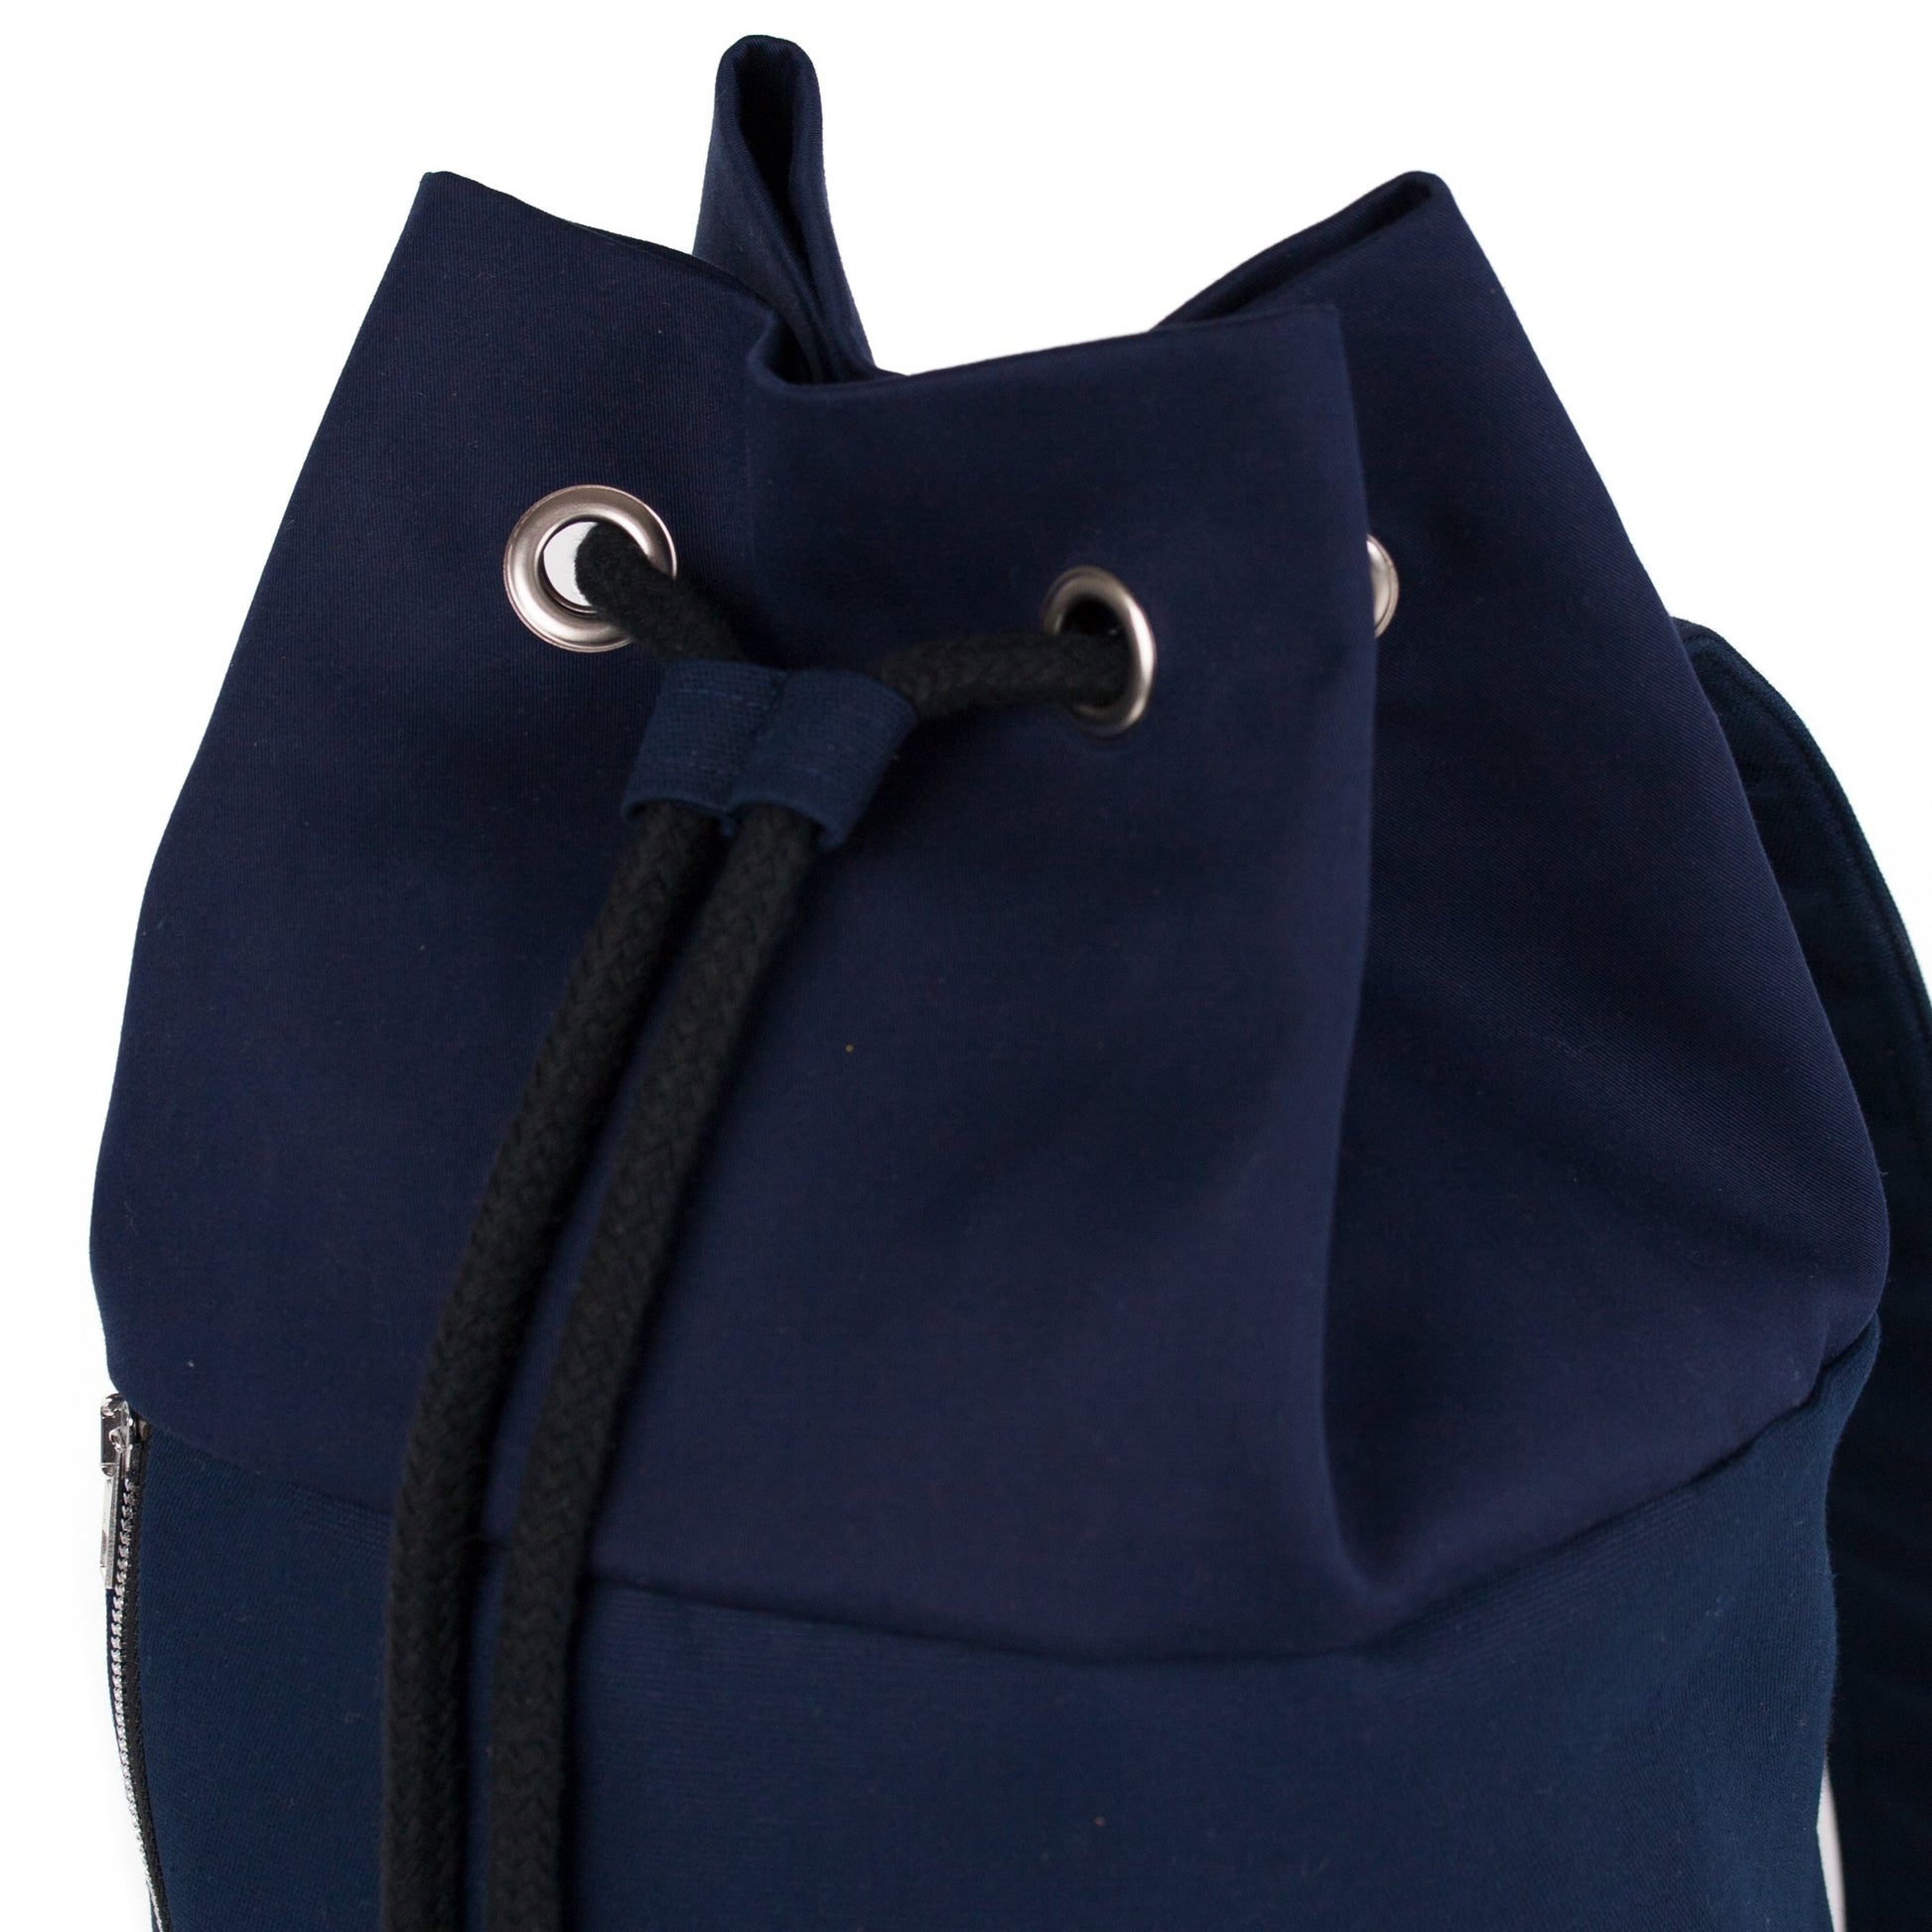 COUDRE X MARINE BAG - Coudre Berlin